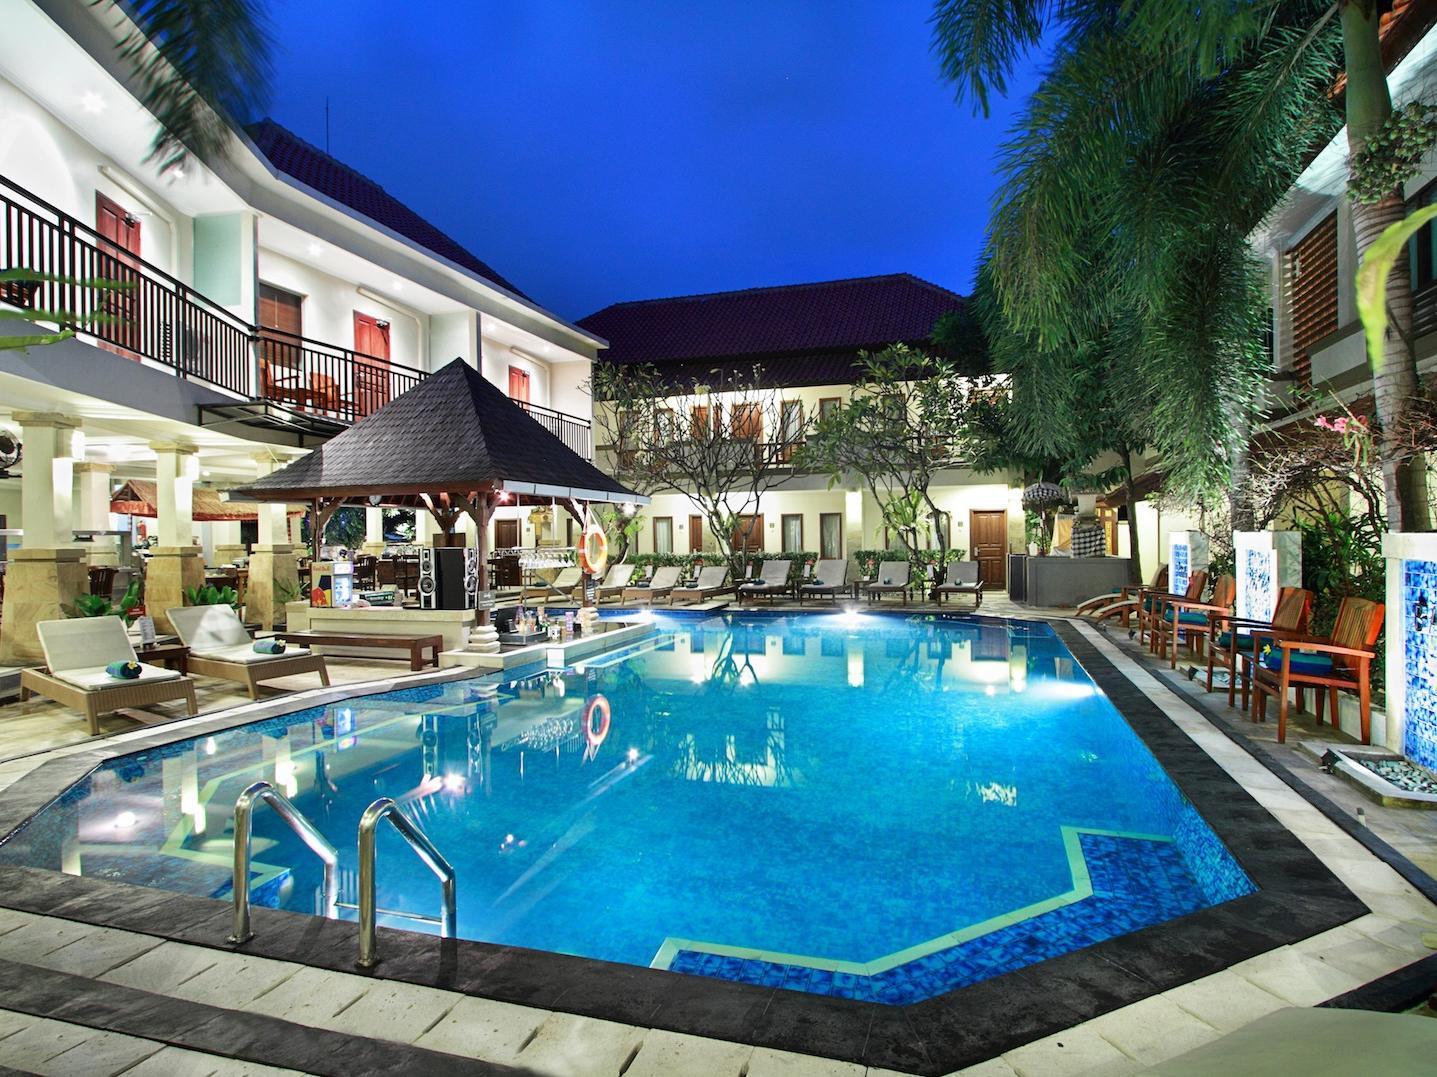 The Niche Bali Hotel Bali District FAQ 2016, What facilities are there in The Niche Bali Hotel Bali District 2016, What Languages Spoken are Supported in The Niche Bali Hotel Bali District 2016, Which payment cards are accepted in The Niche Bali Hotel Bali District , Bali District The Niche Bali Hotel room facilities and services Q&A 2016, Bali District The Niche Bali Hotel online booking services 2016, Bali District The Niche Bali Hotel address 2016, Bali District The Niche Bali Hotel telephone number 2016,Bali District The Niche Bali Hotel map 2016, Bali District The Niche Bali Hotel traffic guide 2016, how to go Bali District The Niche Bali Hotel, Bali District The Niche Bali Hotel booking online 2016, Bali District The Niche Bali Hotel room types 2016.